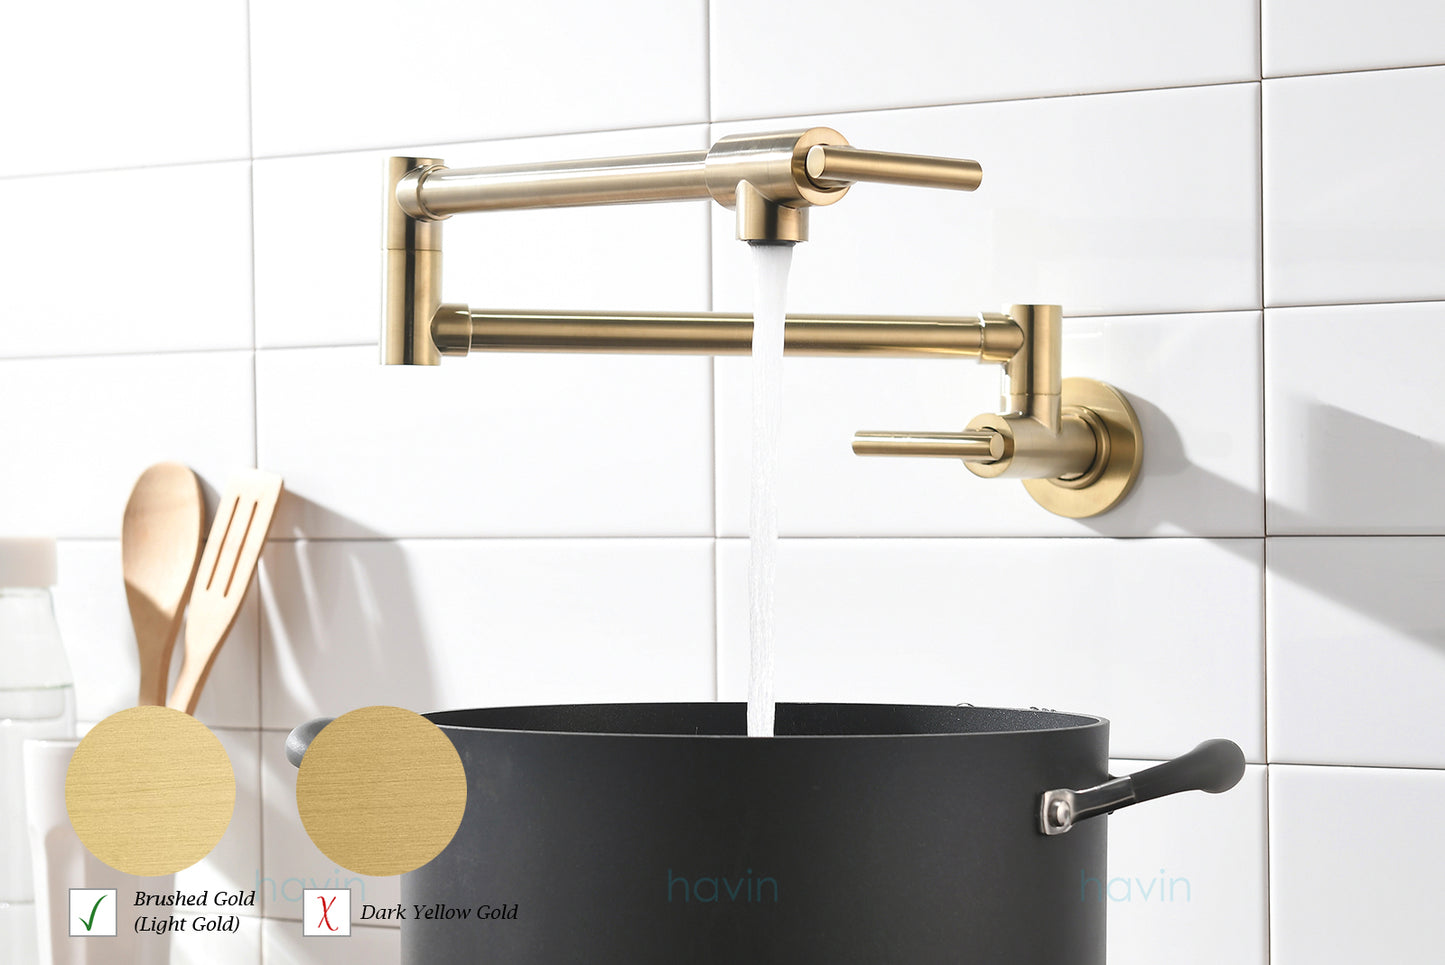 Havin Pot Filler Faucet Wall Mount,with Double Joint Swing Arms,Single Hole, 2 Handles with 2 cartridges to Control Water (Style A A206 Brushed Gold)